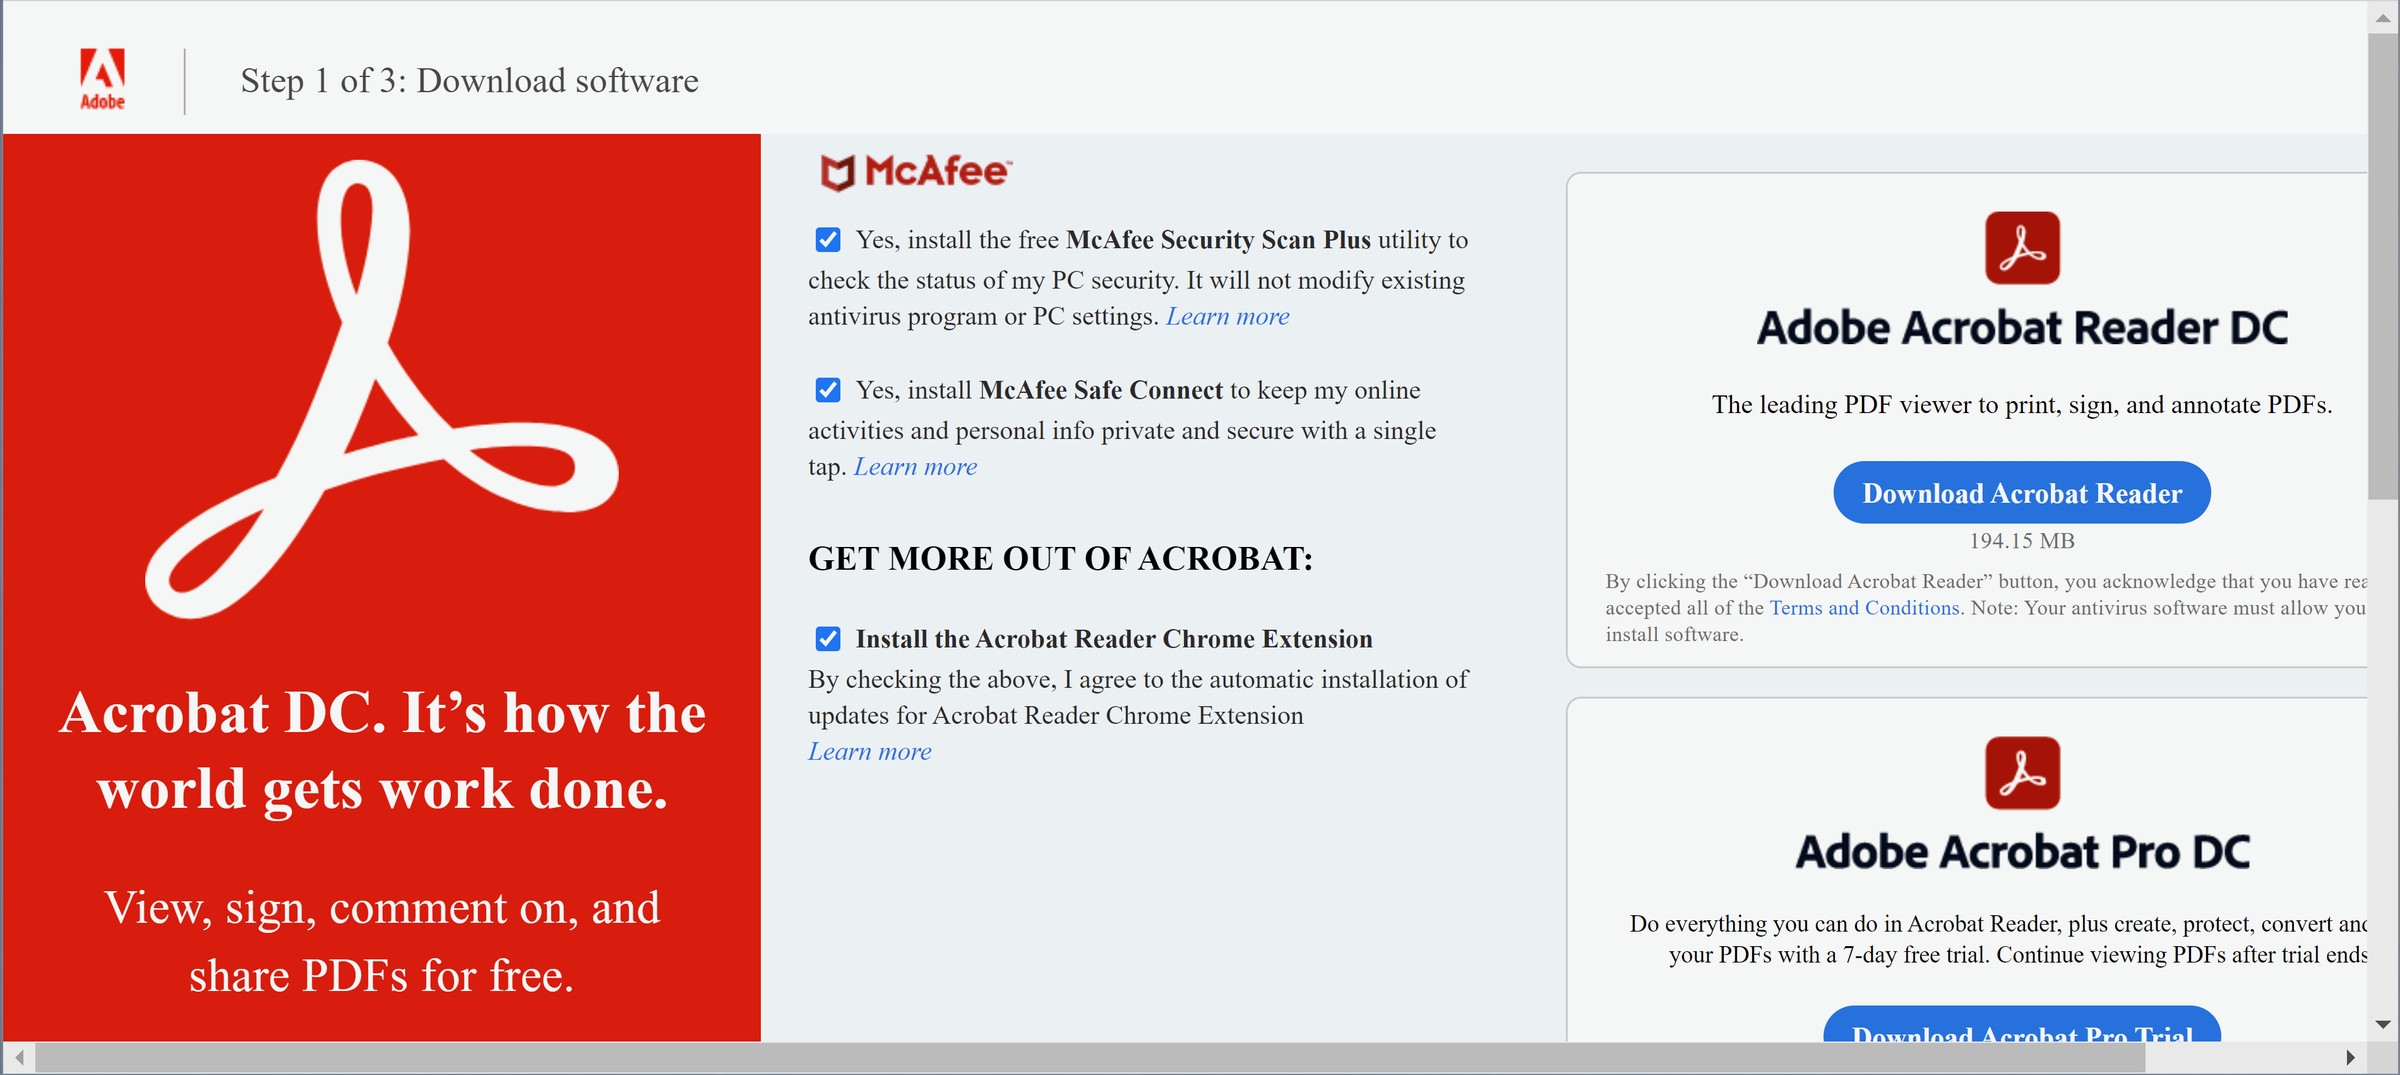 It’s a good idea to uncheck Adobe’s promotional offers before downloading Acrobat Reader